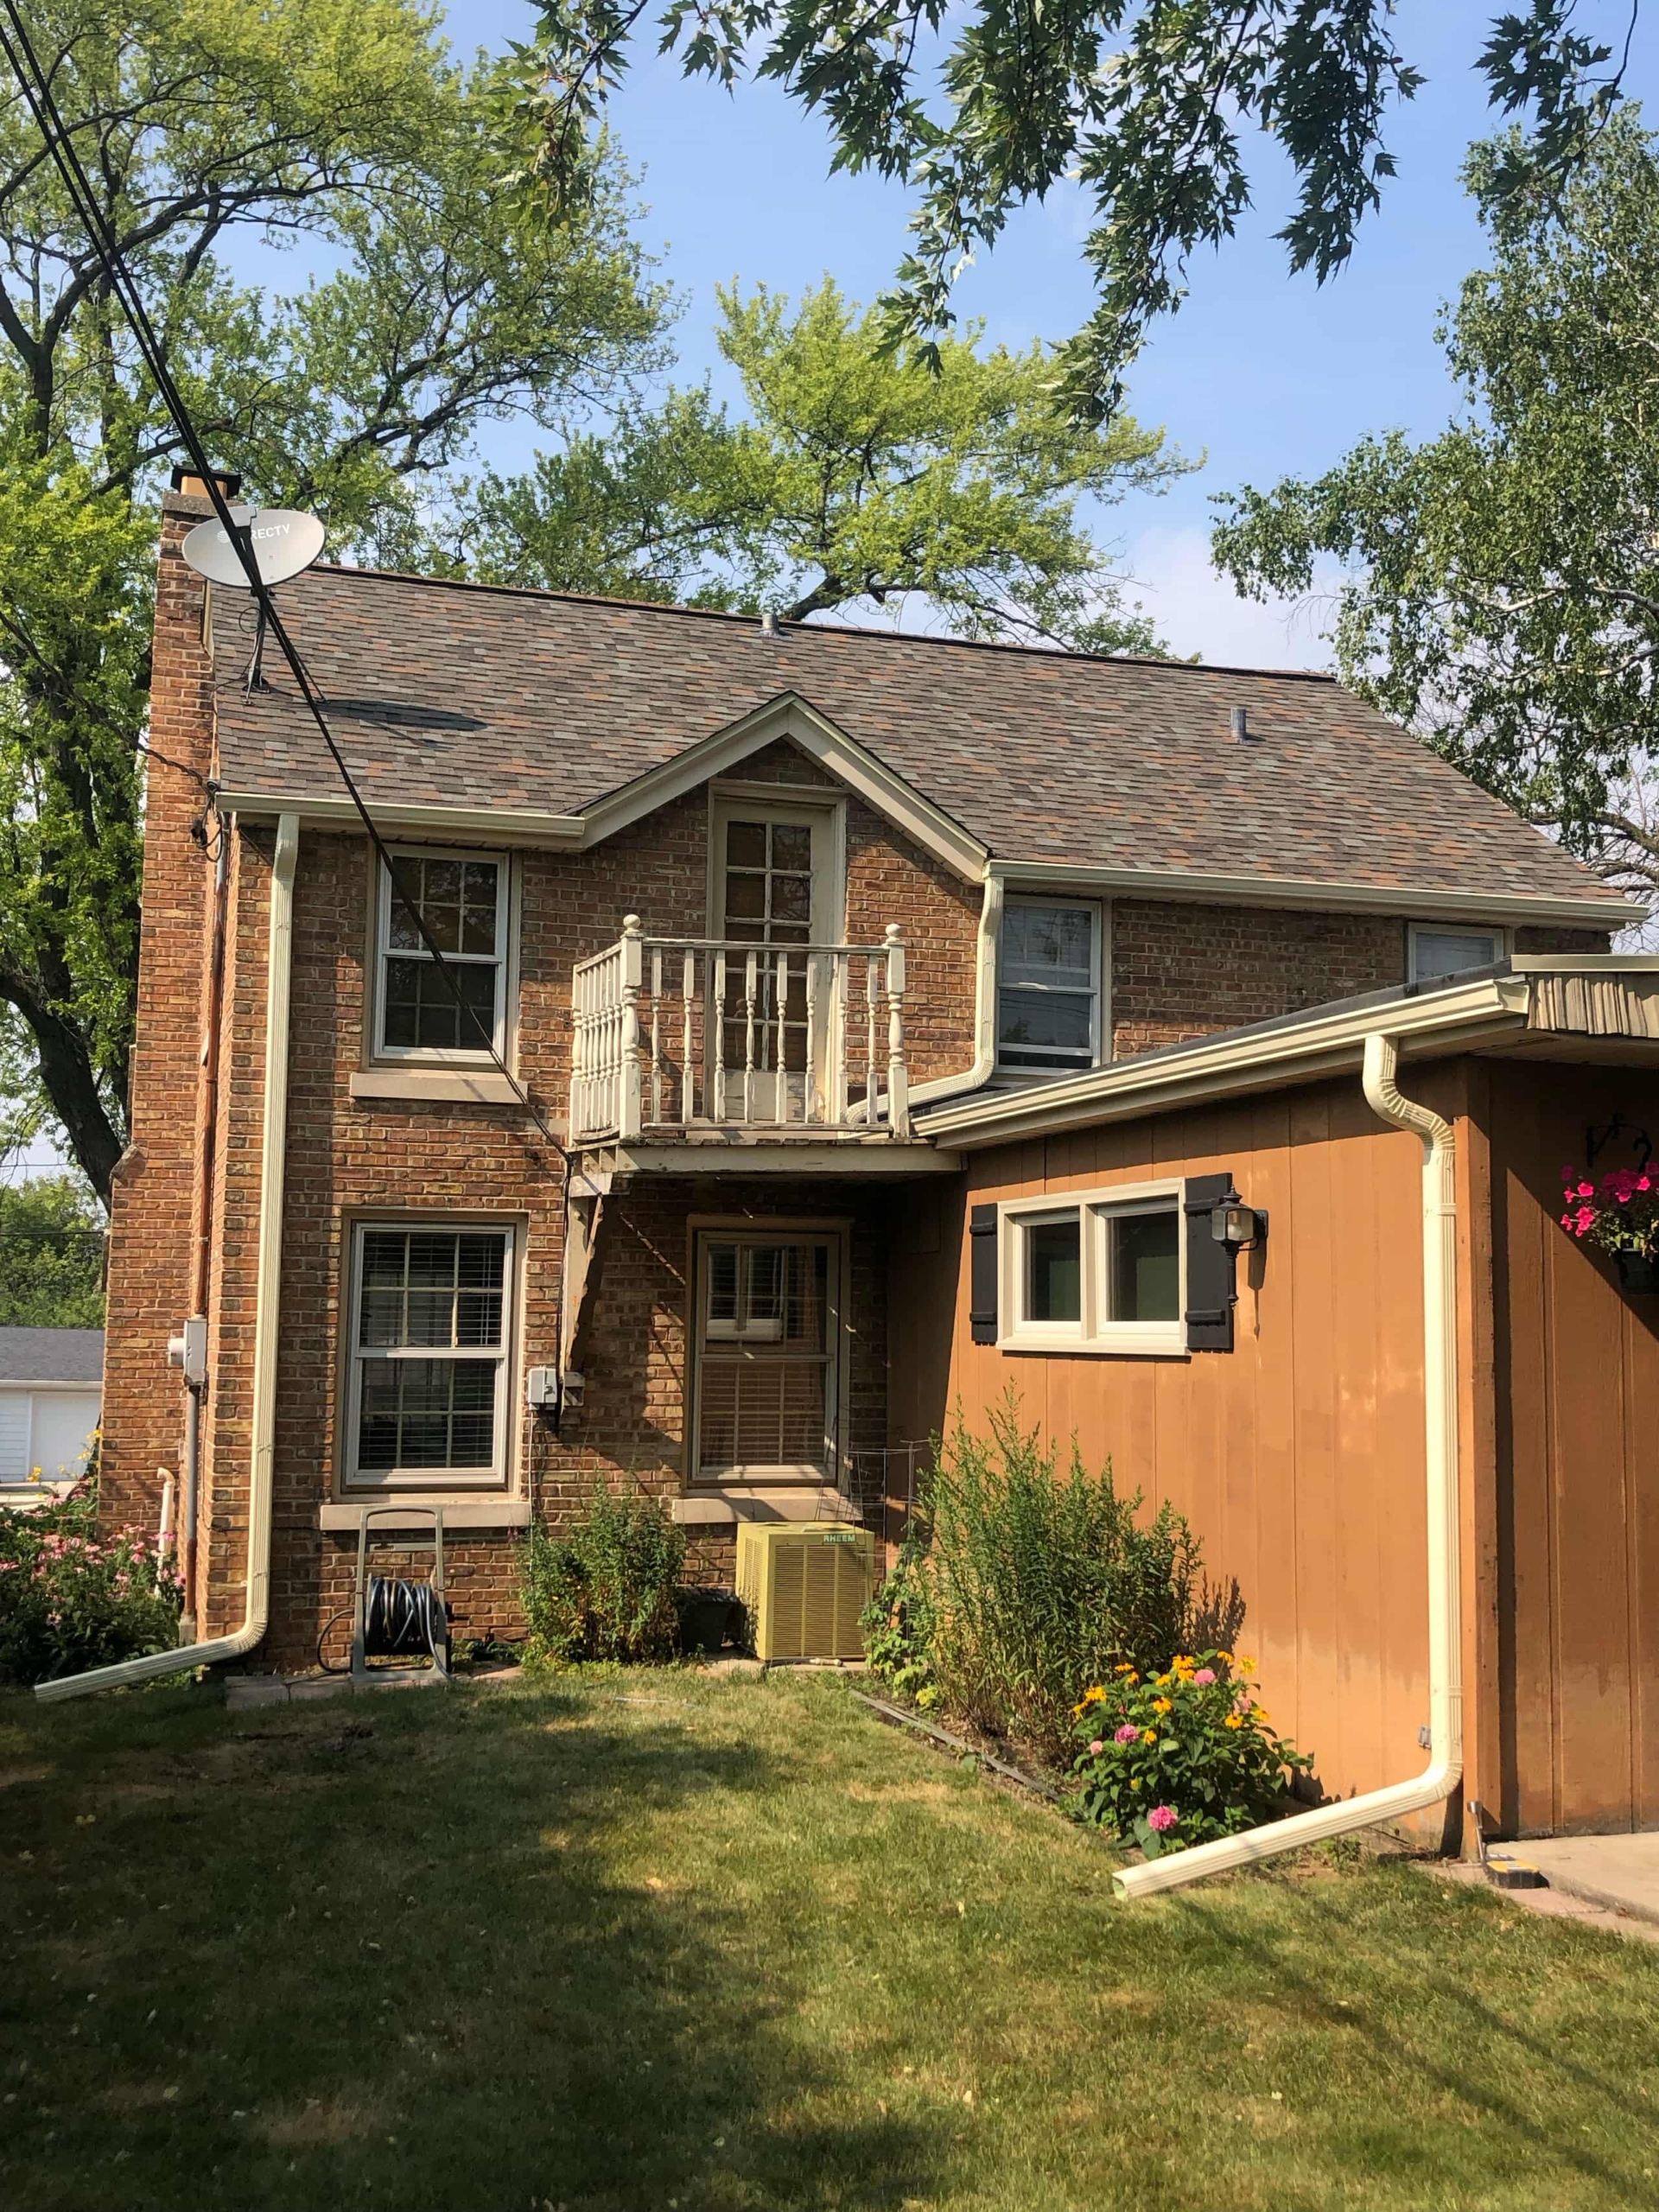 Wisconsin Roofing | Owens Corning Designer Shingles | Aged Copper | Backyard